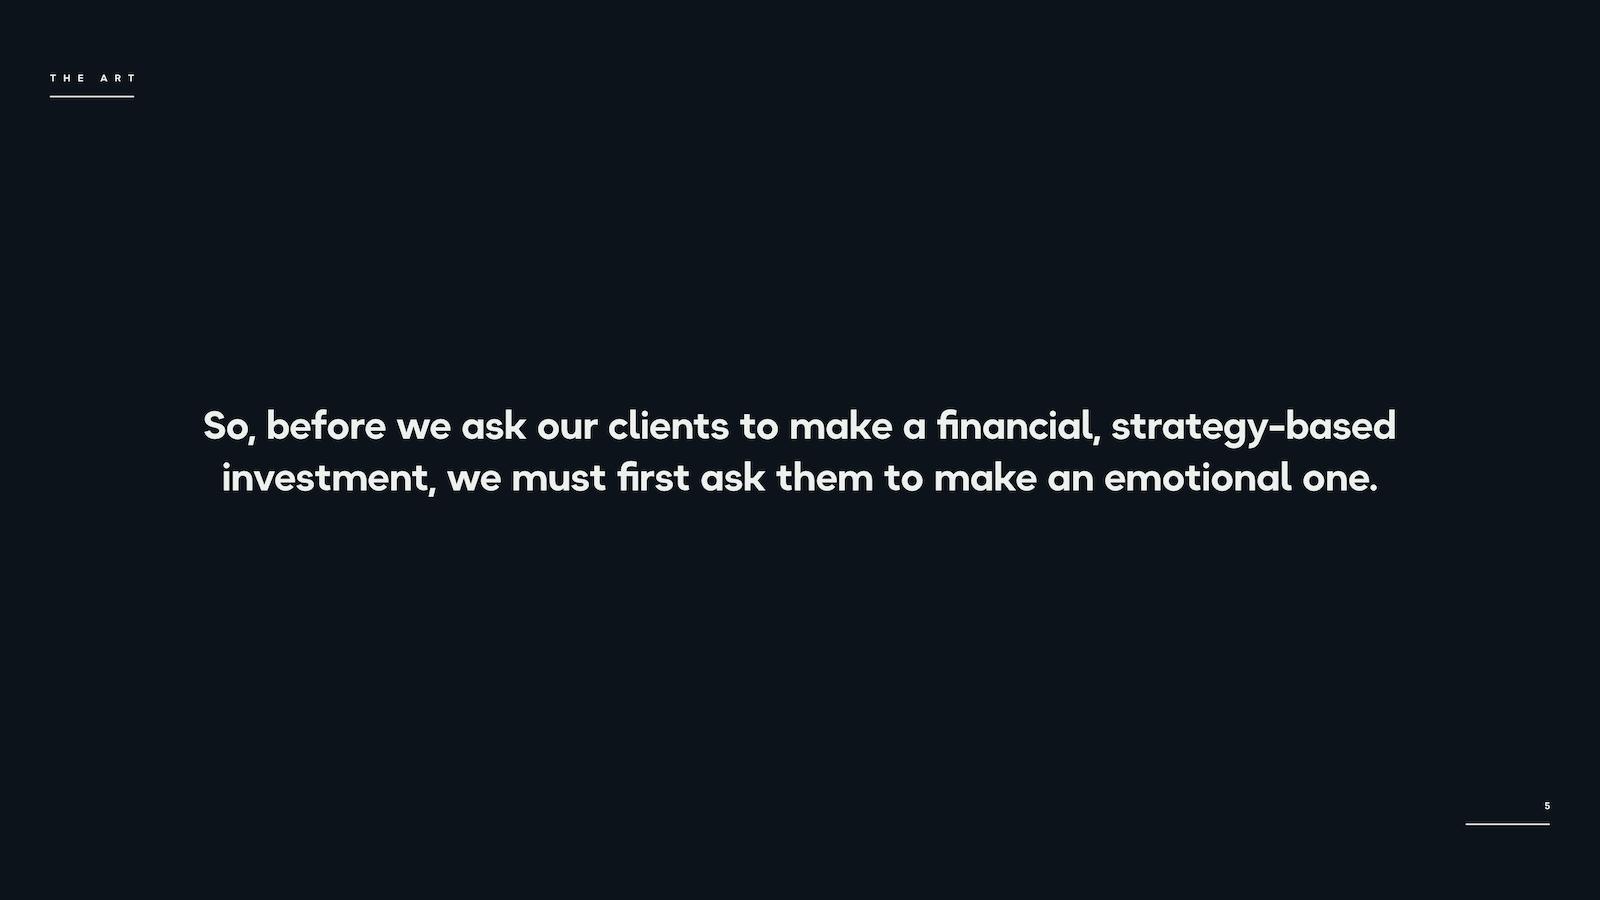 So, before we ask our clients to make a financial, strategy-based investment, we must first ask them to make an emotional one.